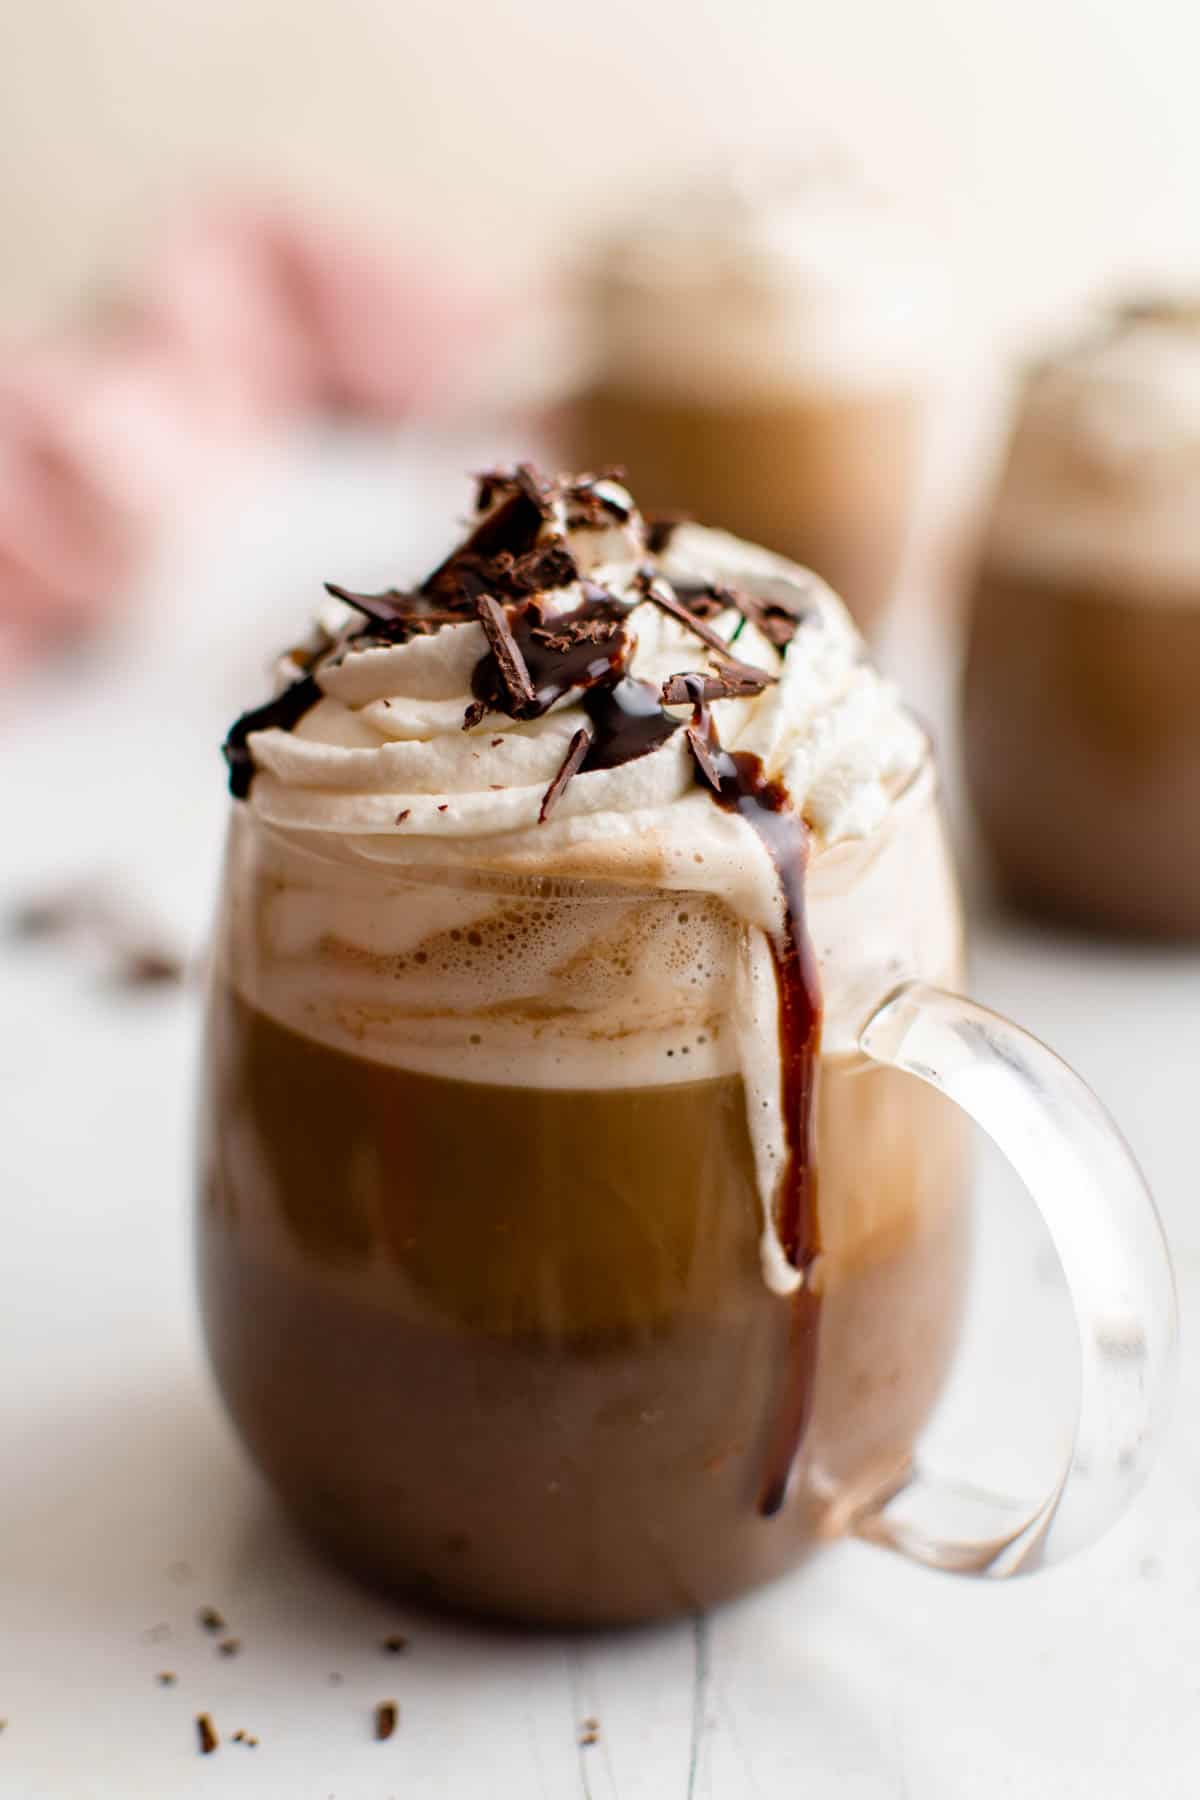 one mocha latter in a glass mug with whipped cream on top and chocolate drizzle